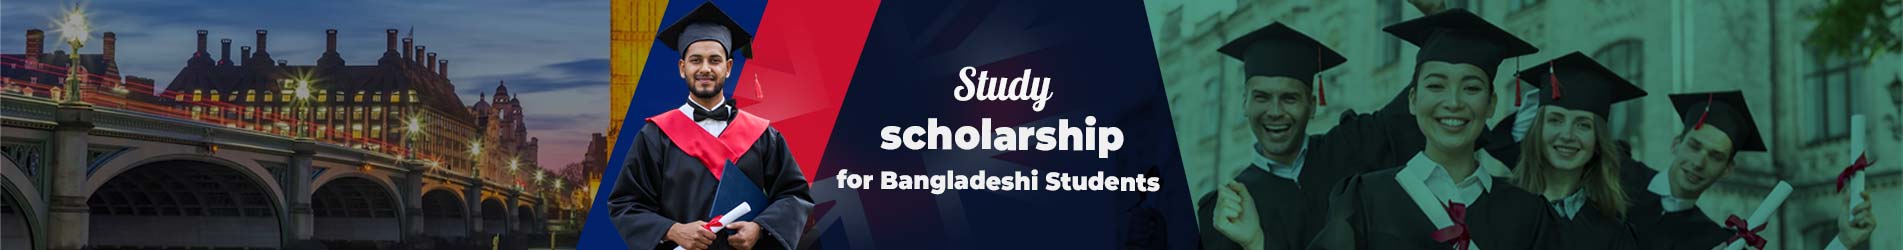 Scholarship for Bangladeshi Students in the UK